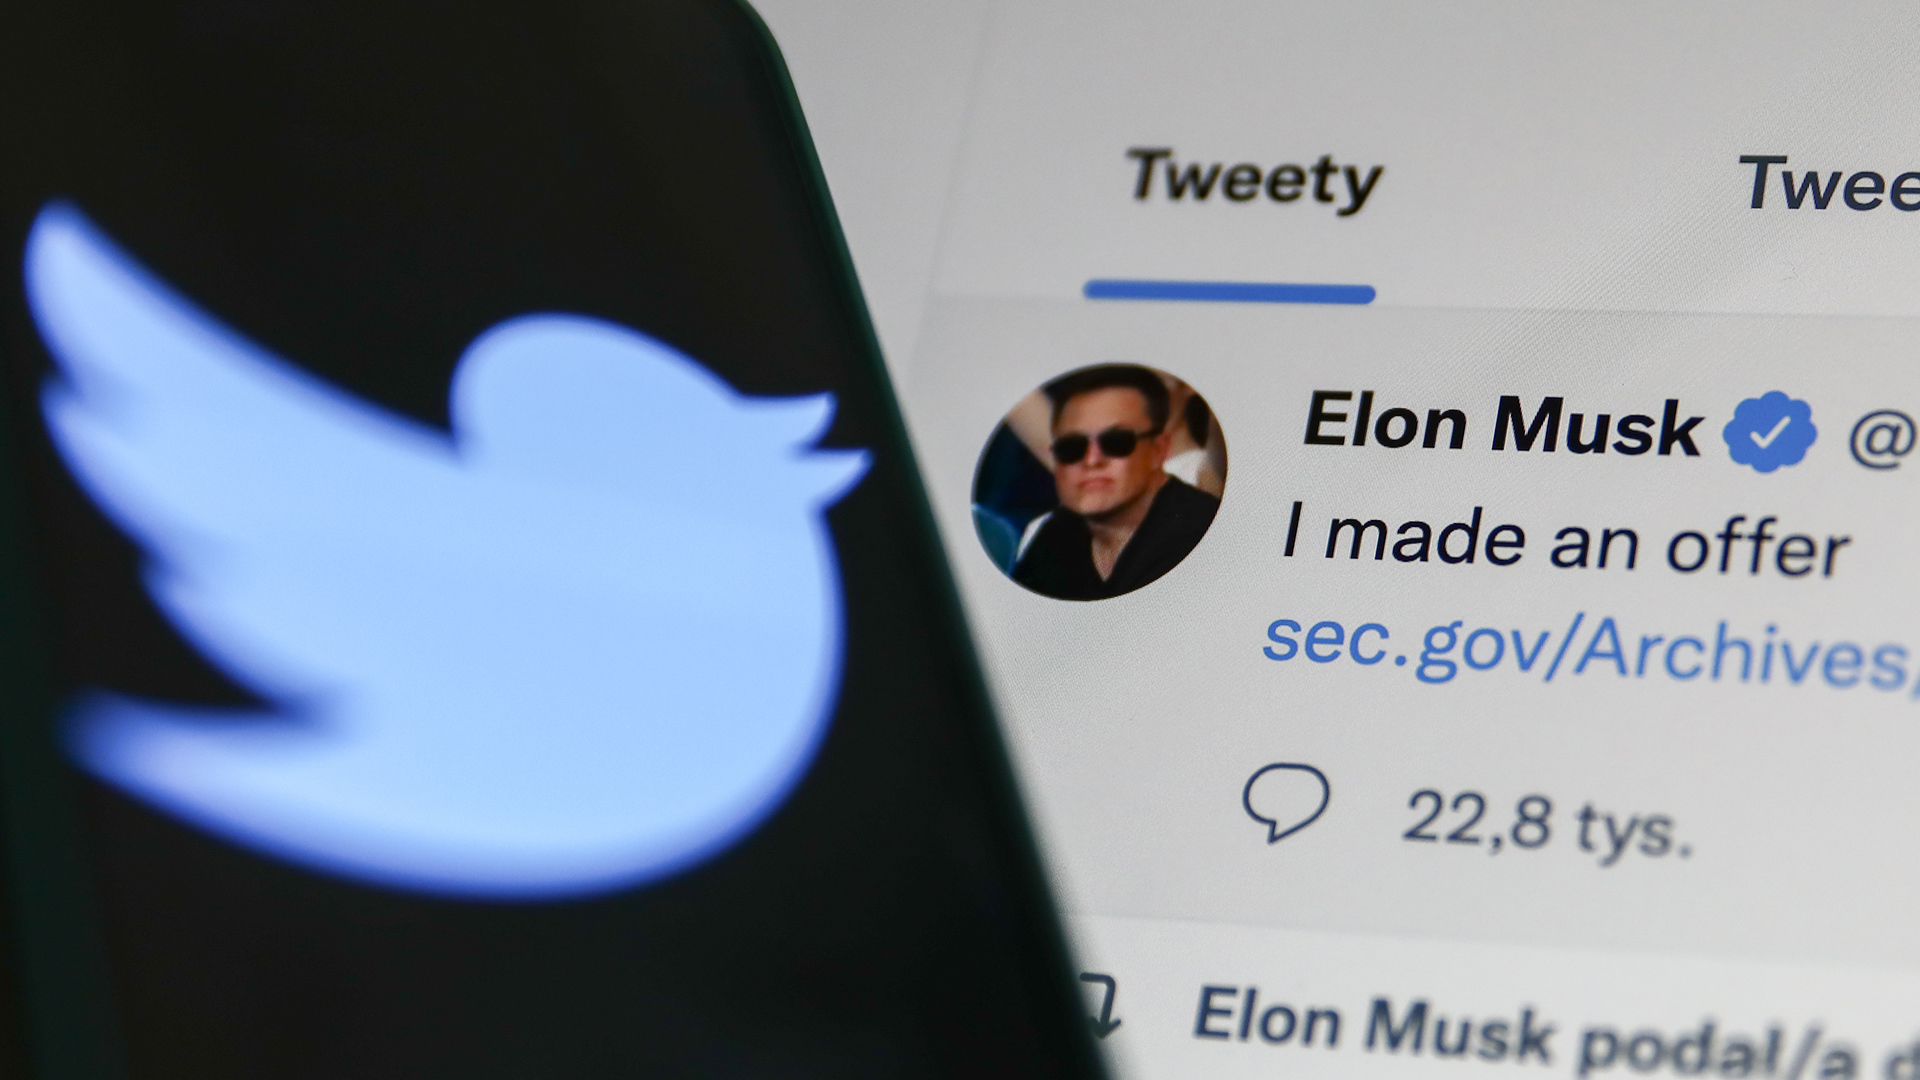 Elon Musk Could Own Twitter, the Social Media Platform Most Critical to Tesla’s Success